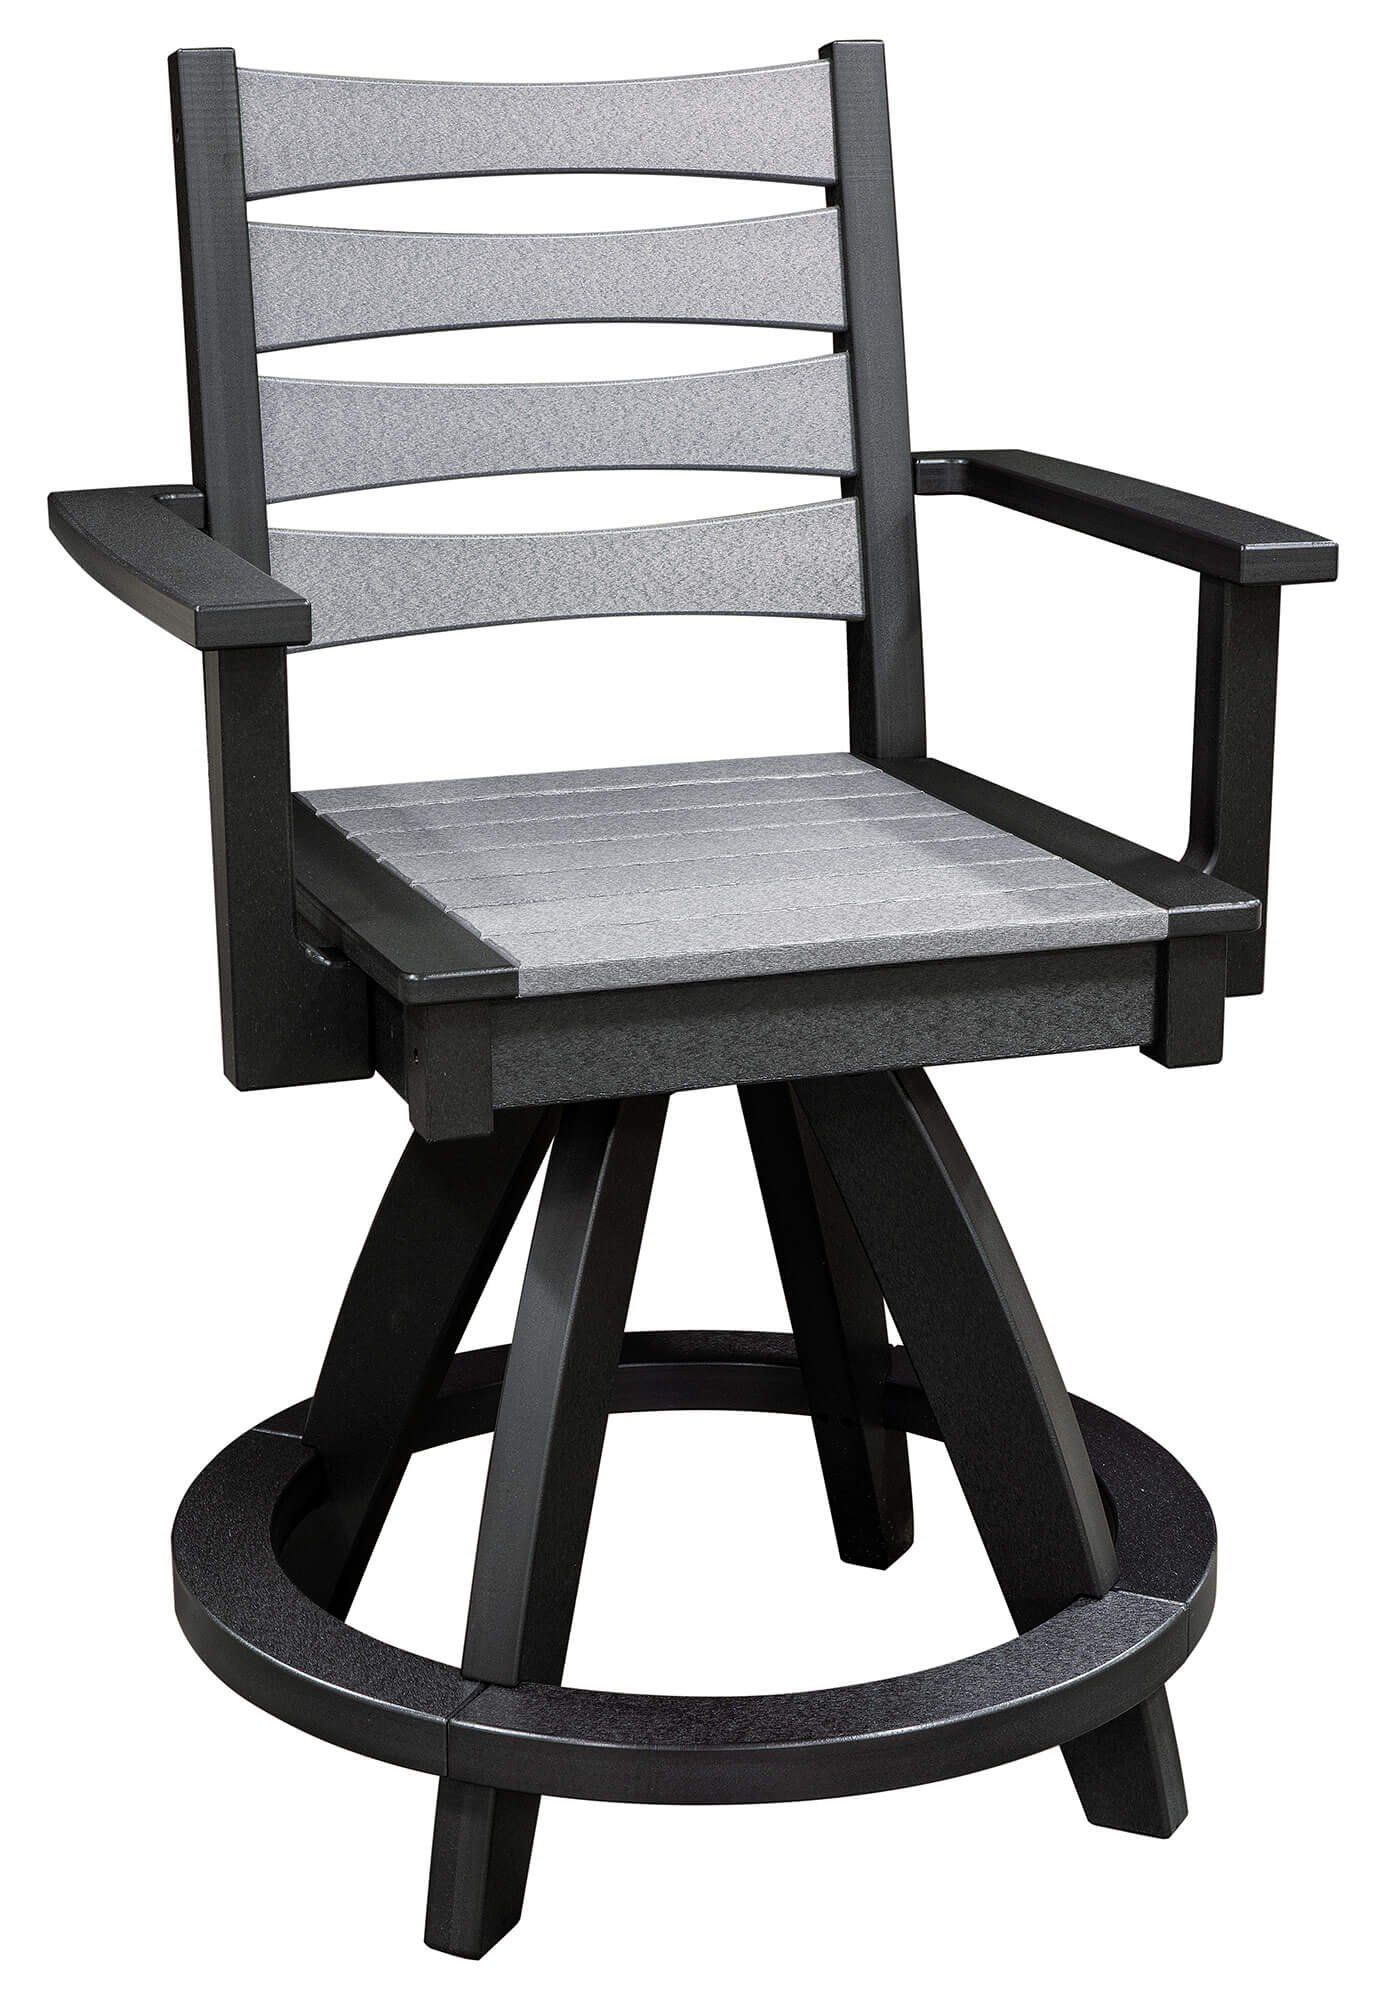 EC-Woods-Tacoma-Outdoor-Poly-Counter-Height-Swivel-Chair-Light-Gray-Black.jpeg